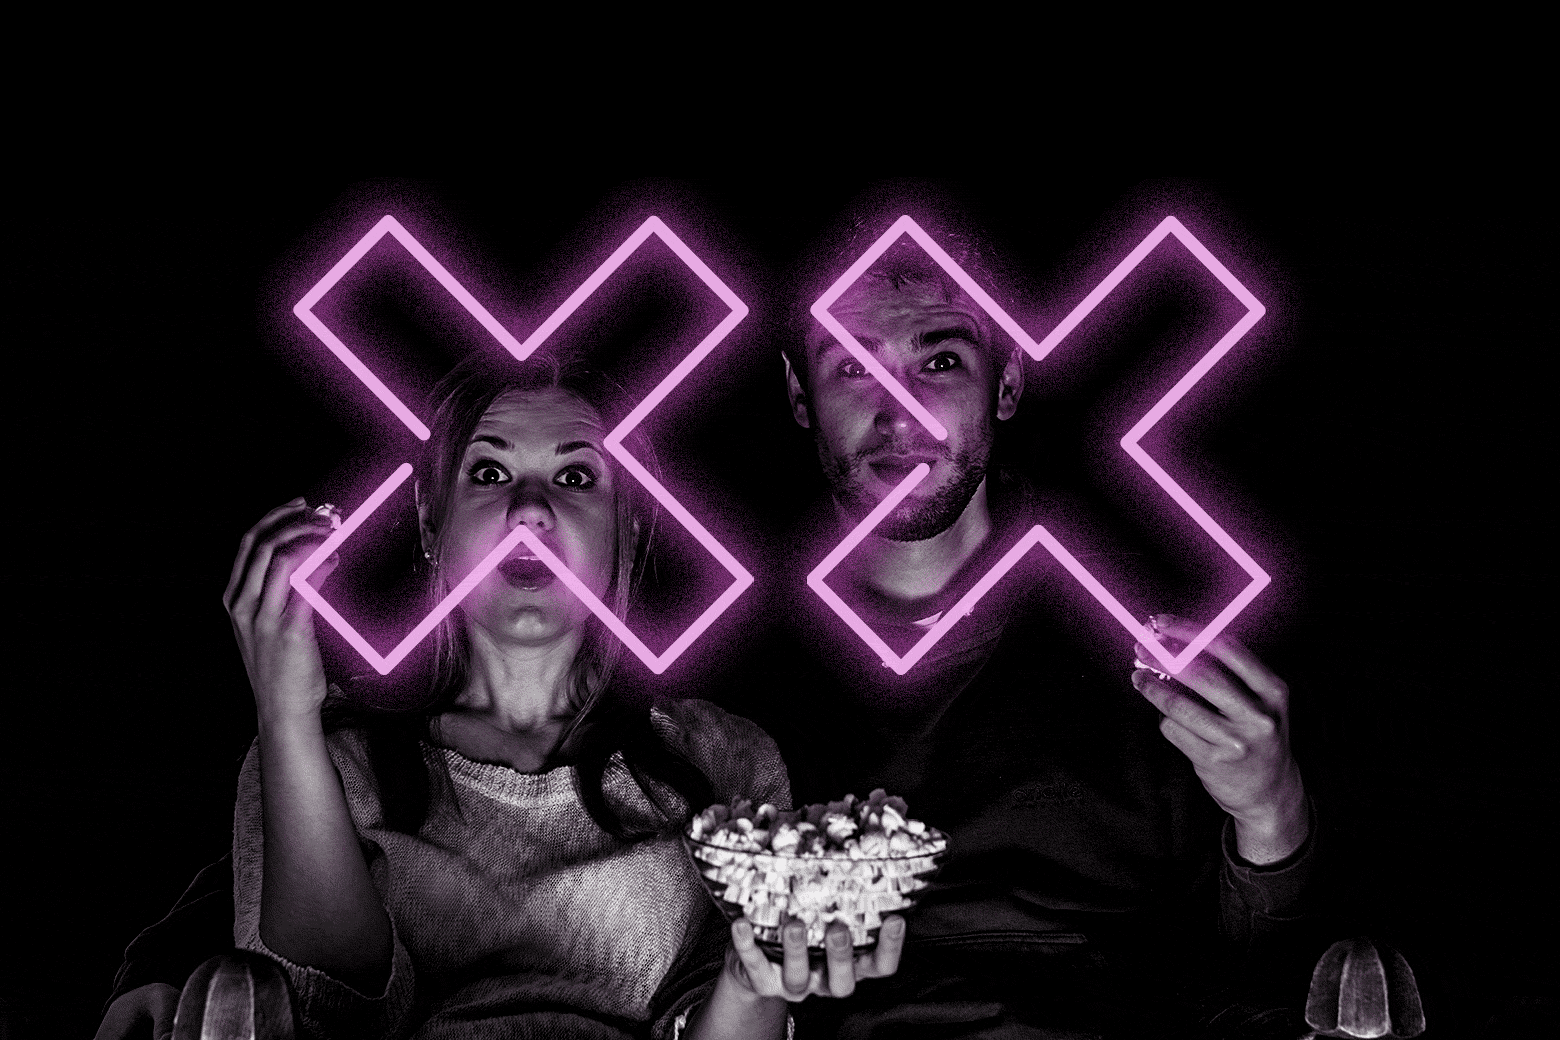 Couple with popcorn. Two "X"s are overlayed on top of them.